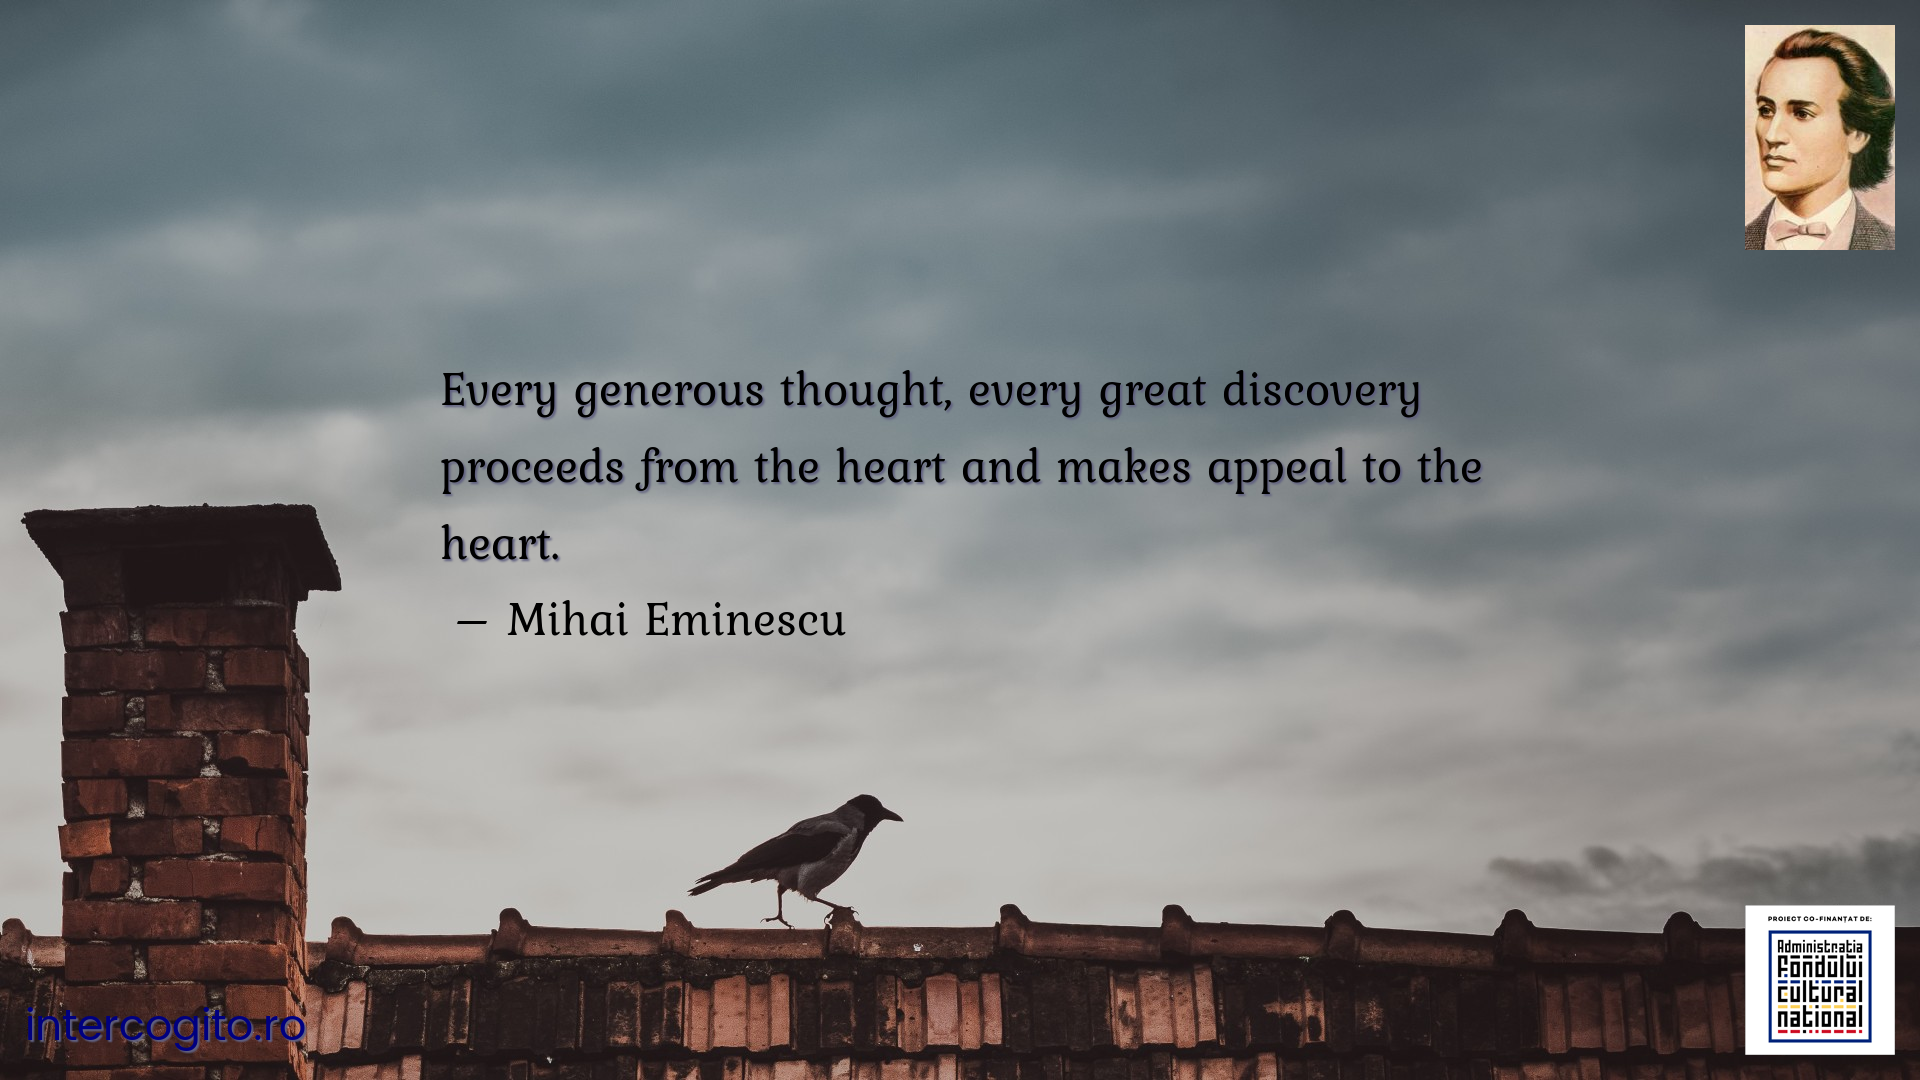 Every generous thought, every great discovery proceeds from the heart and makes appeal to the heart.